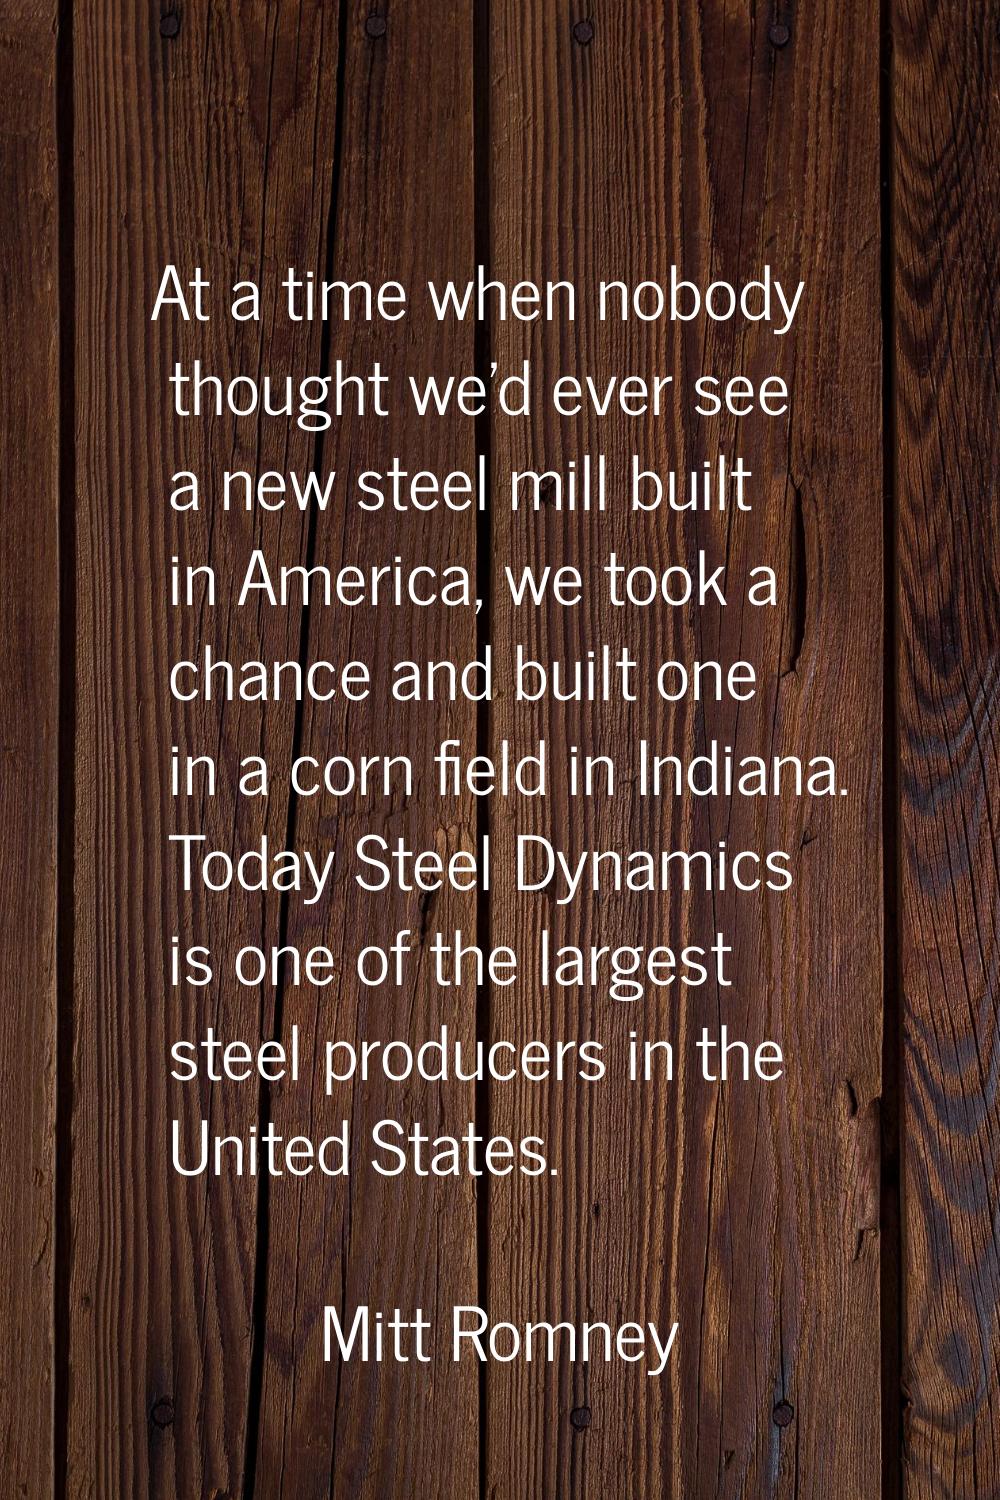 At a time when nobody thought we'd ever see a new steel mill built in America, we took a chance and